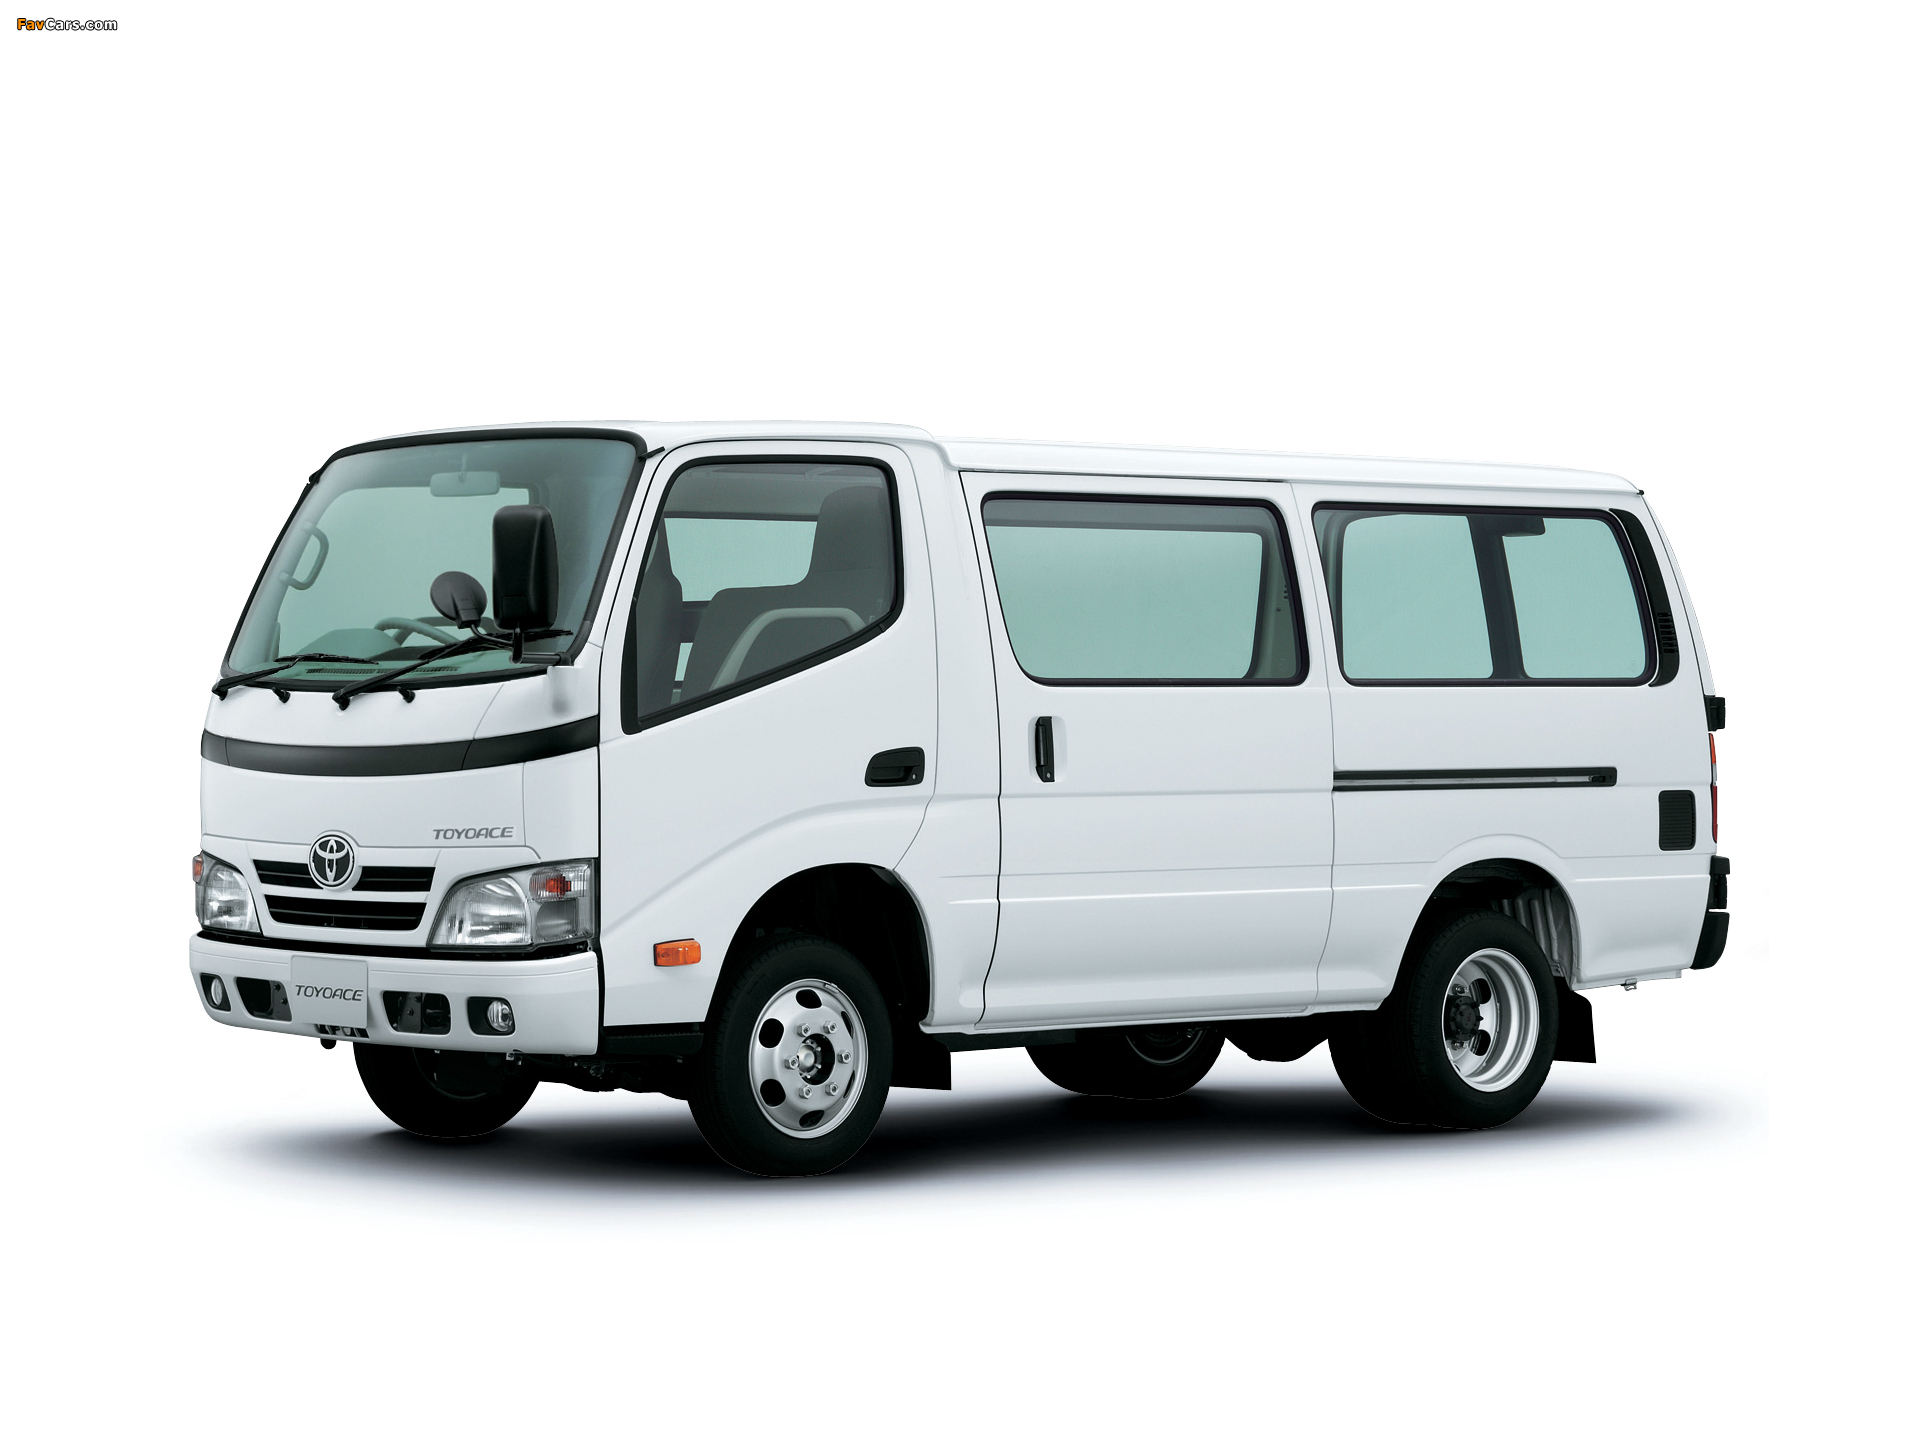 Toyota Toyoace Van 2006 pictures (1920 x 1440)